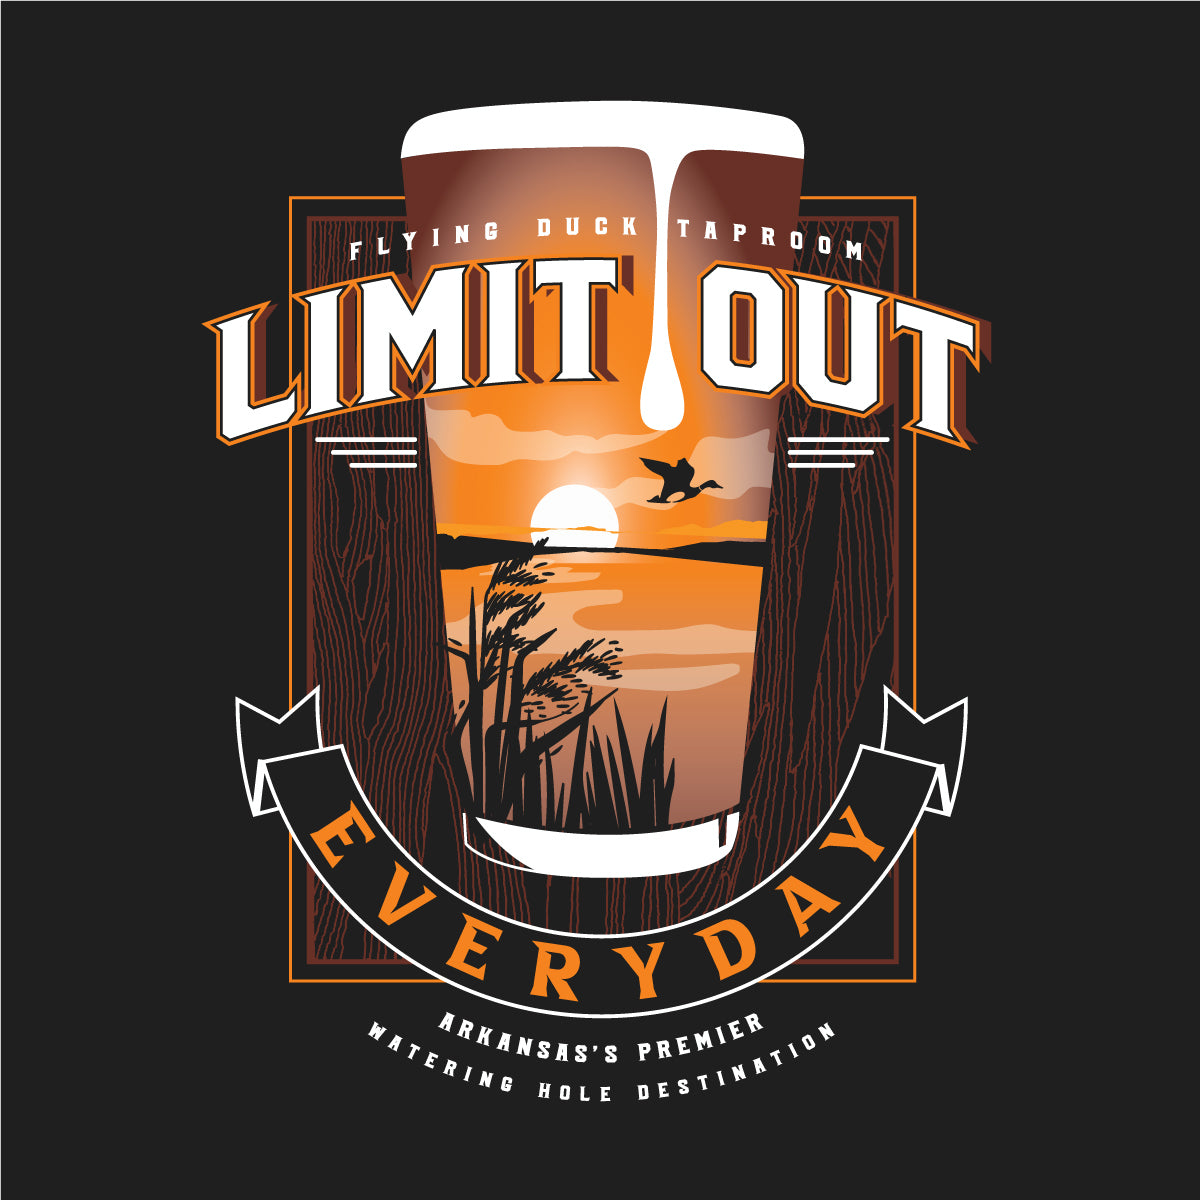 Limit Out Graphic T-Shirt - NEW